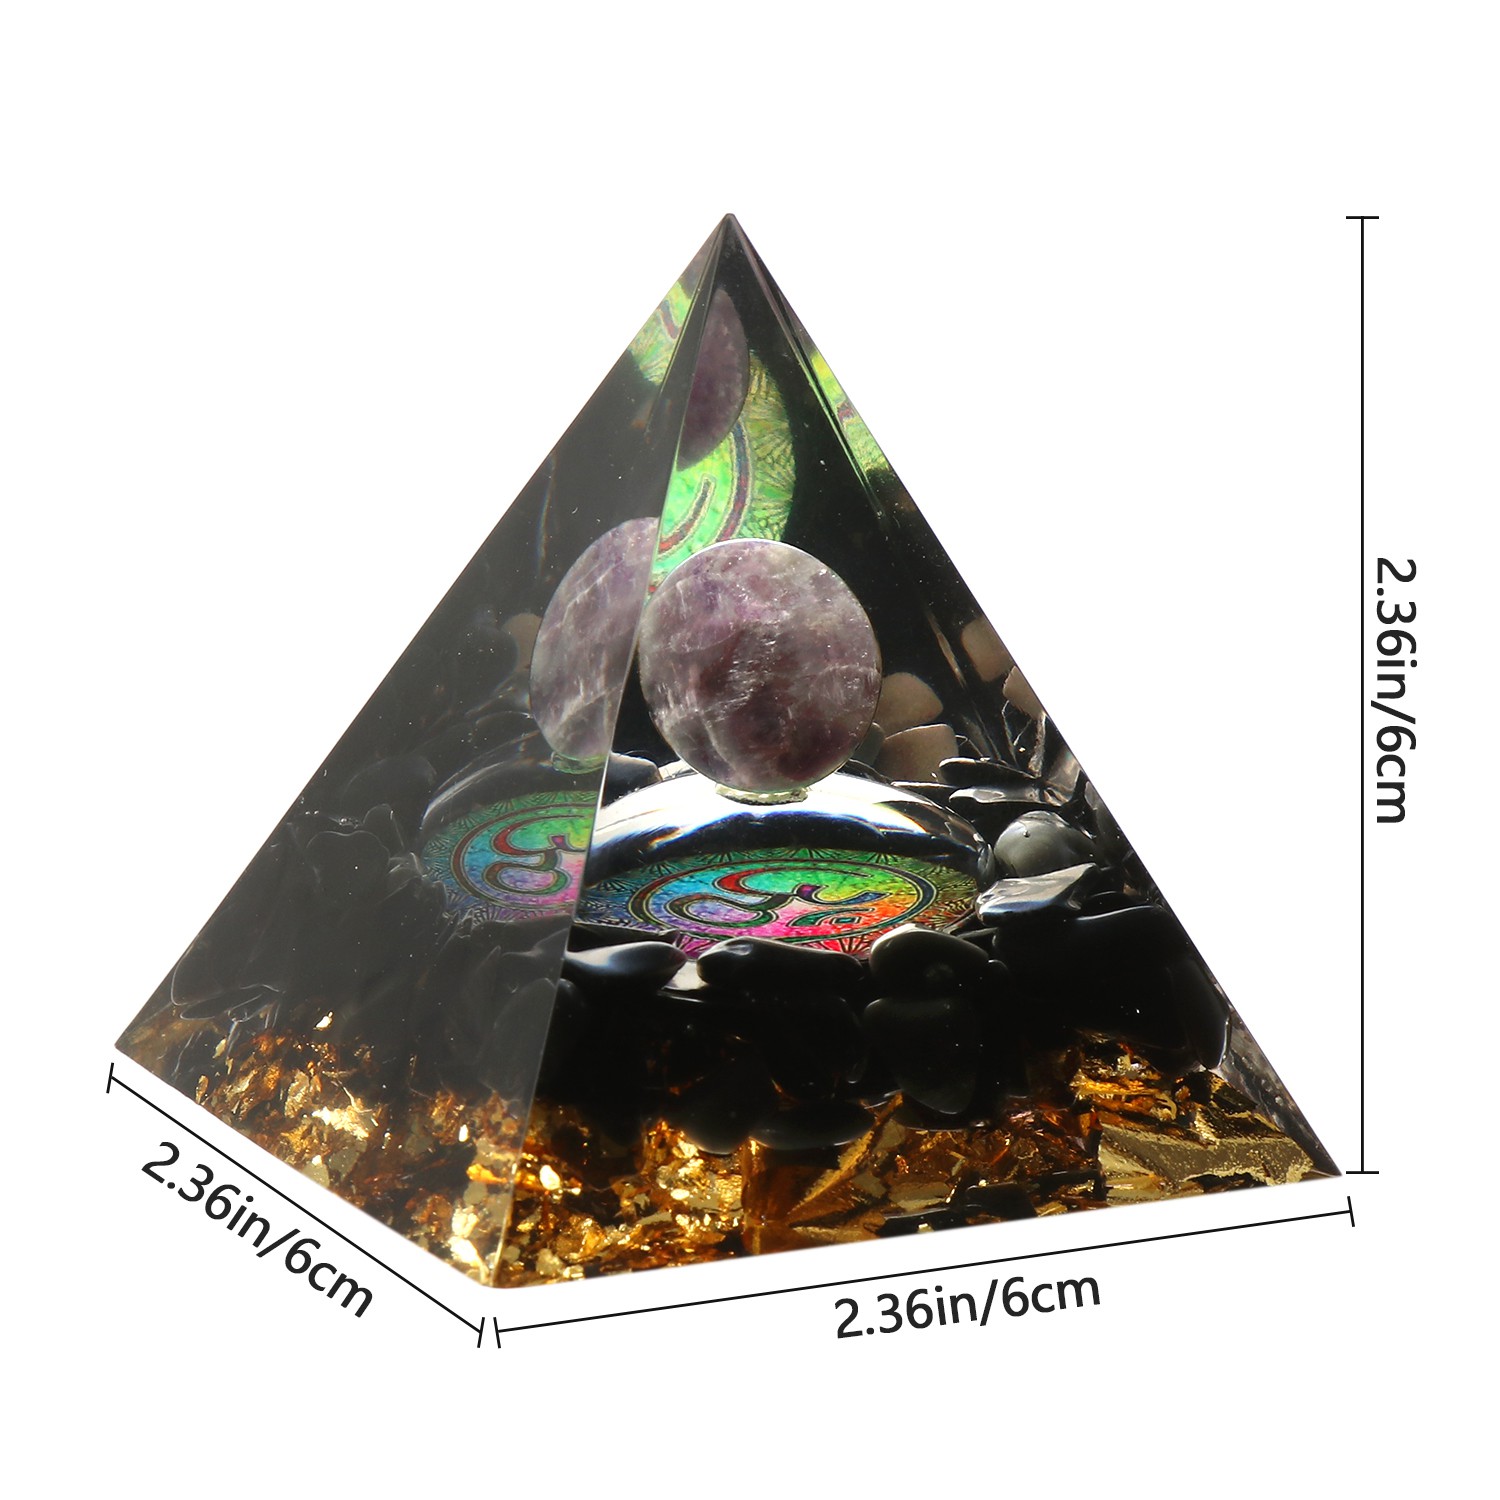 ❀SIMPLE❀ Shelf Decor Orgone Pyramid Spirtual Things|Decor Positive Energy Generator Chakra|Orgonite Boost Immune System Hand Craft Gifts for Women with Obsidian|EMF Protection – Healing